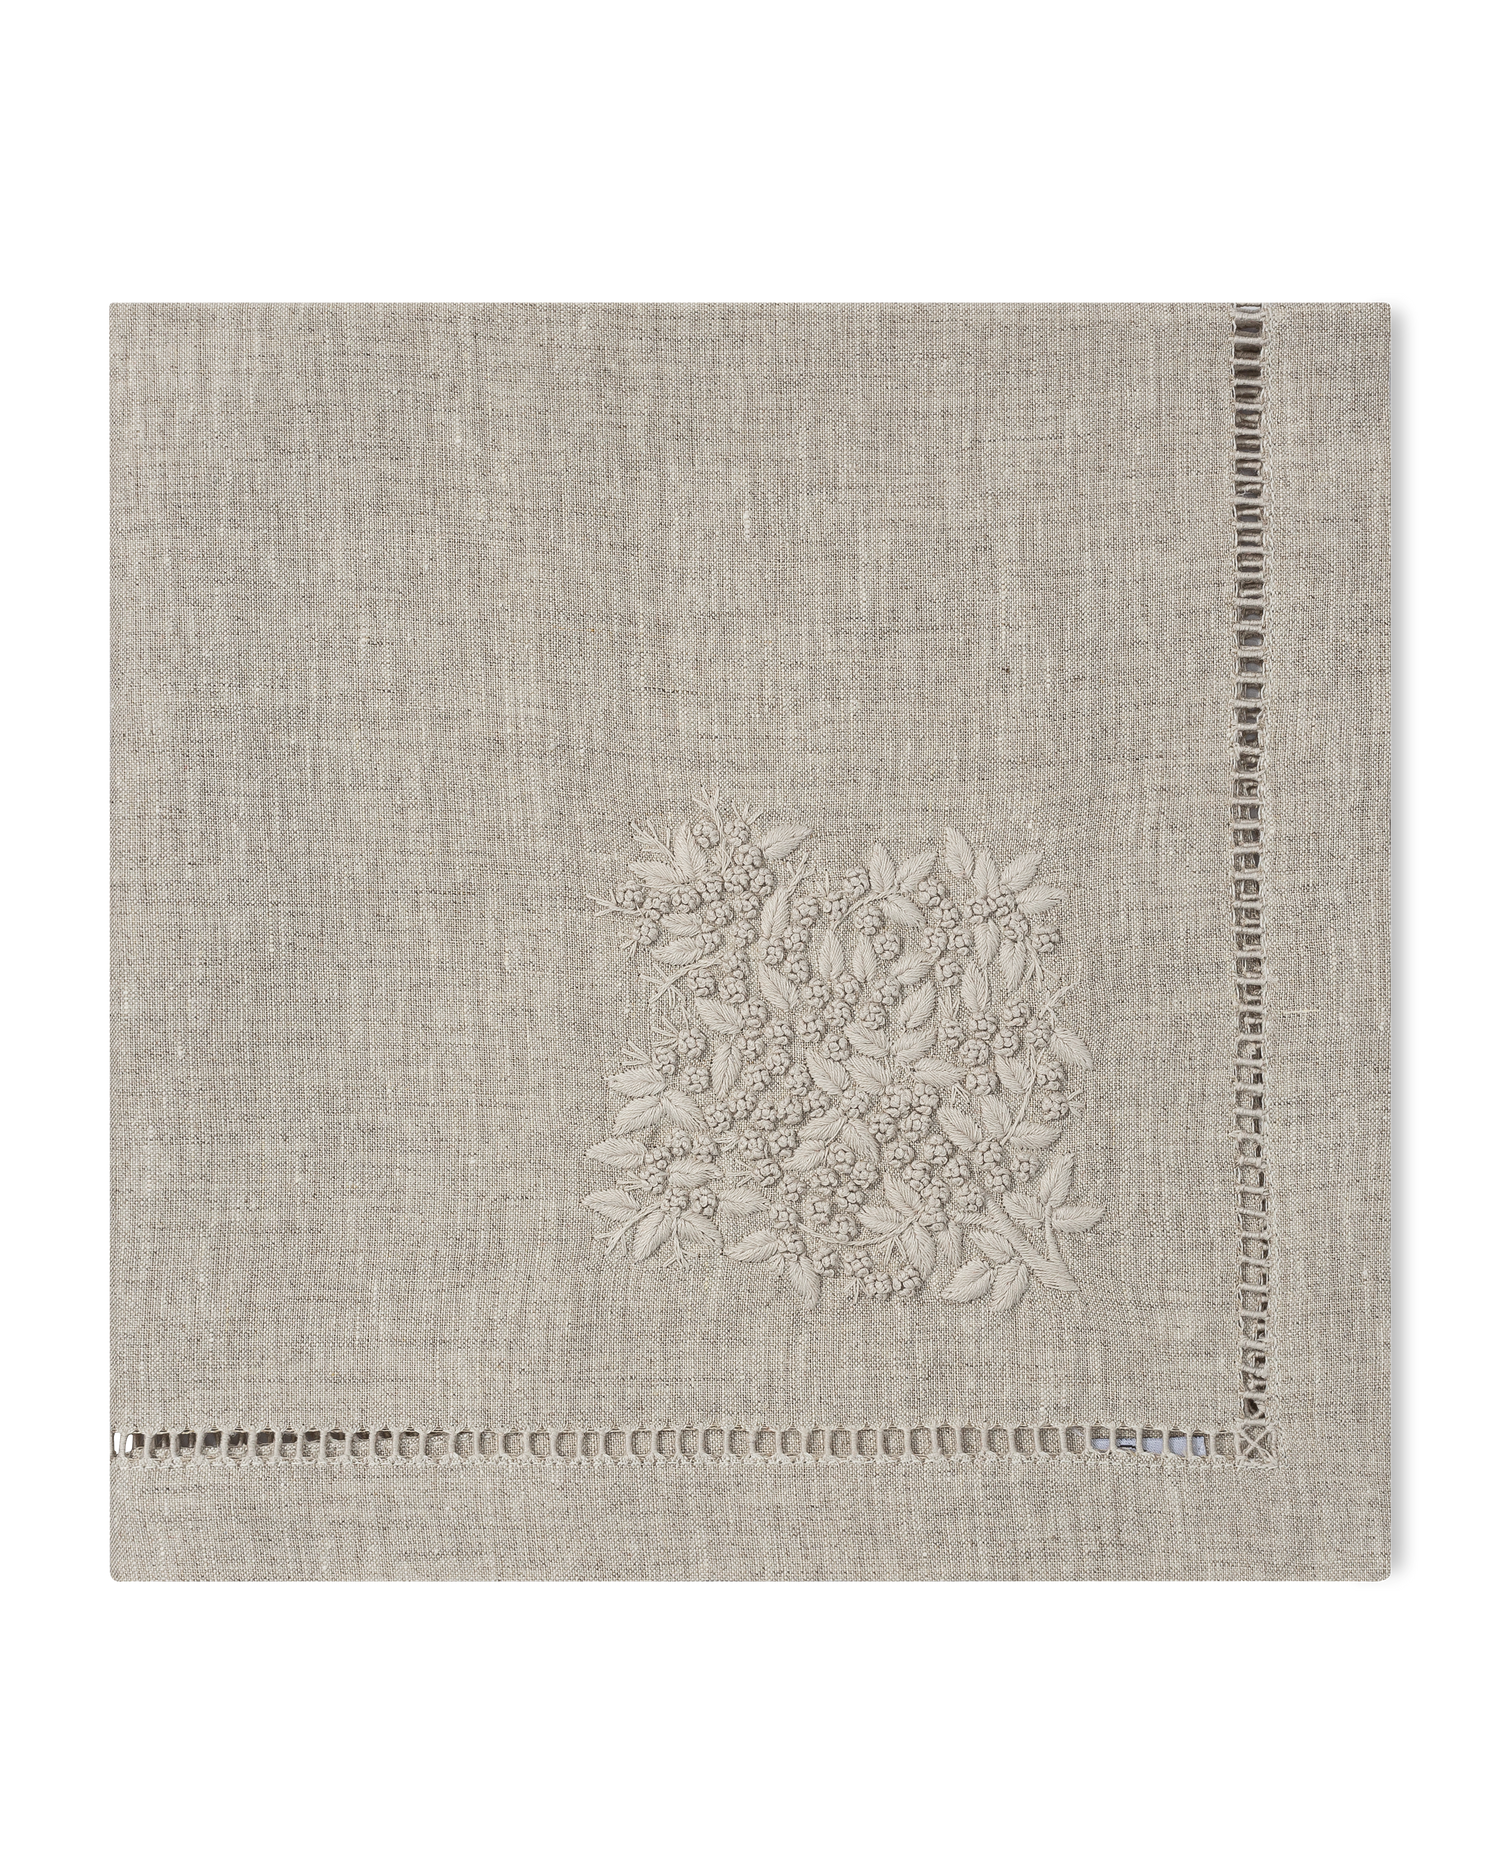 A natural linen napkin with a hemstitch border and natural french knot floral embroidery